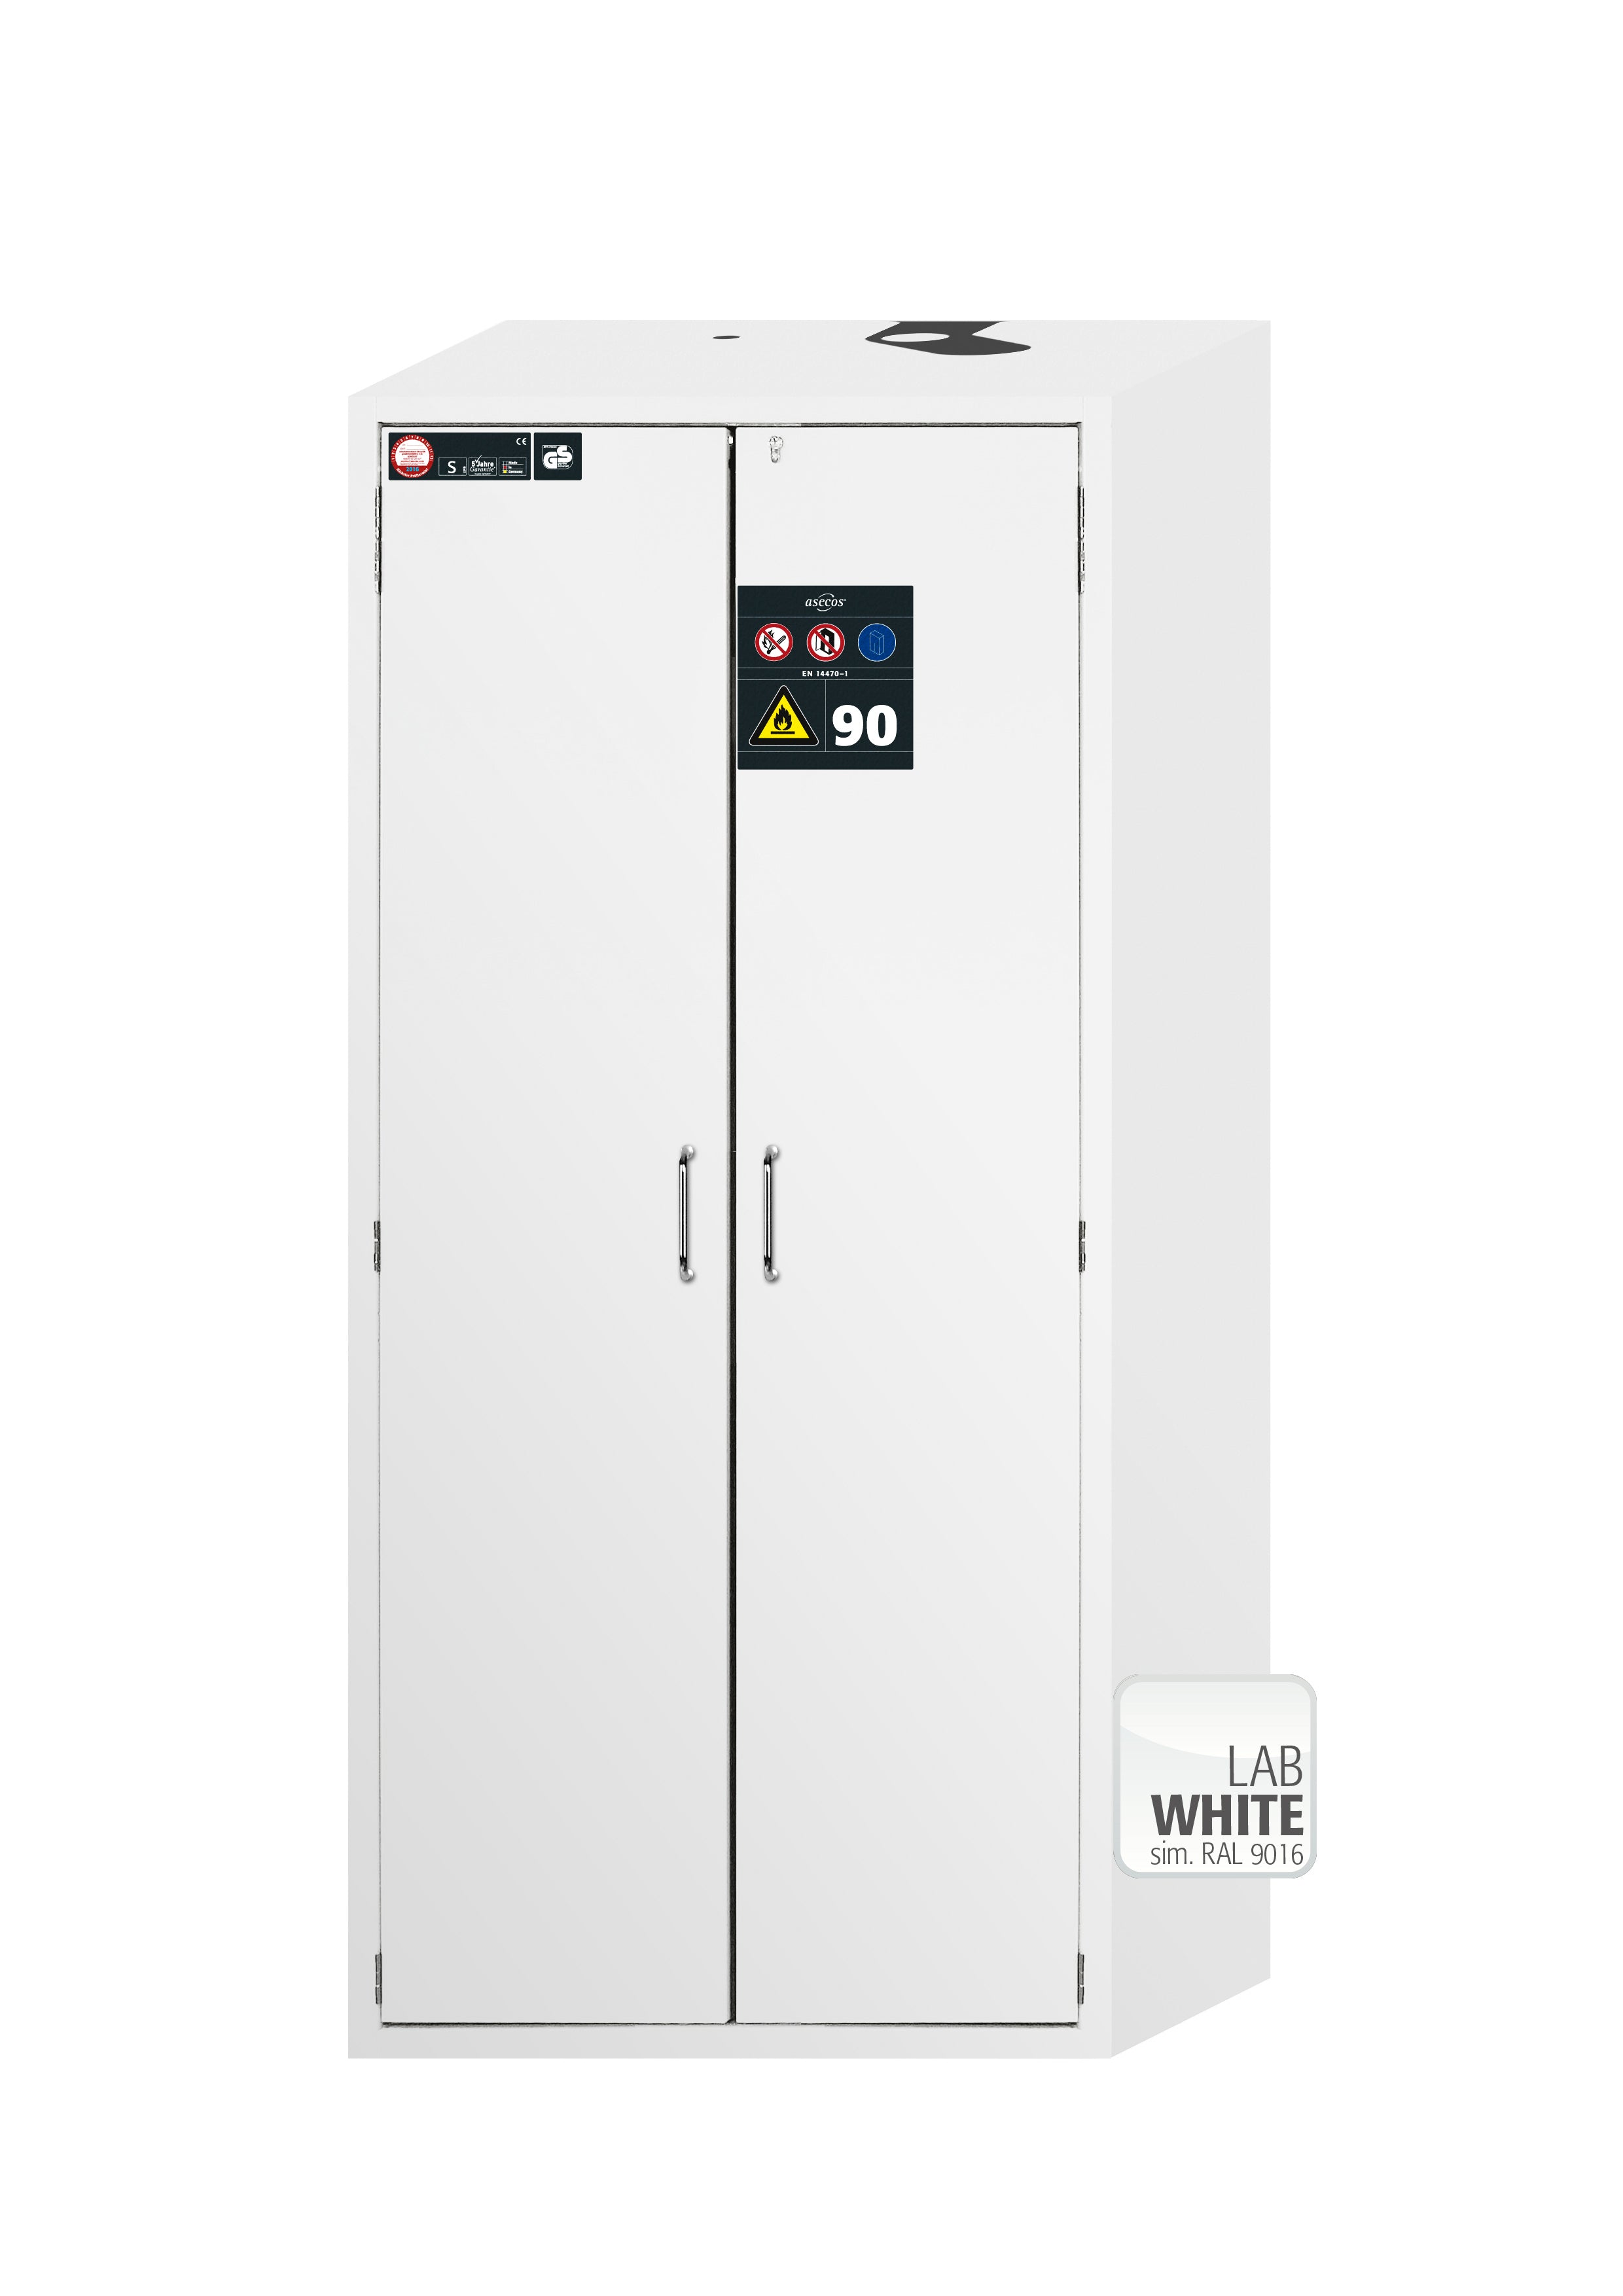 Type 90 safety cabinet S-CLASSIC-90 model S90.196.090.WDAS in laboratory white (similar to RAL 9016) with 4x standard pull-out tray (sheet steel)